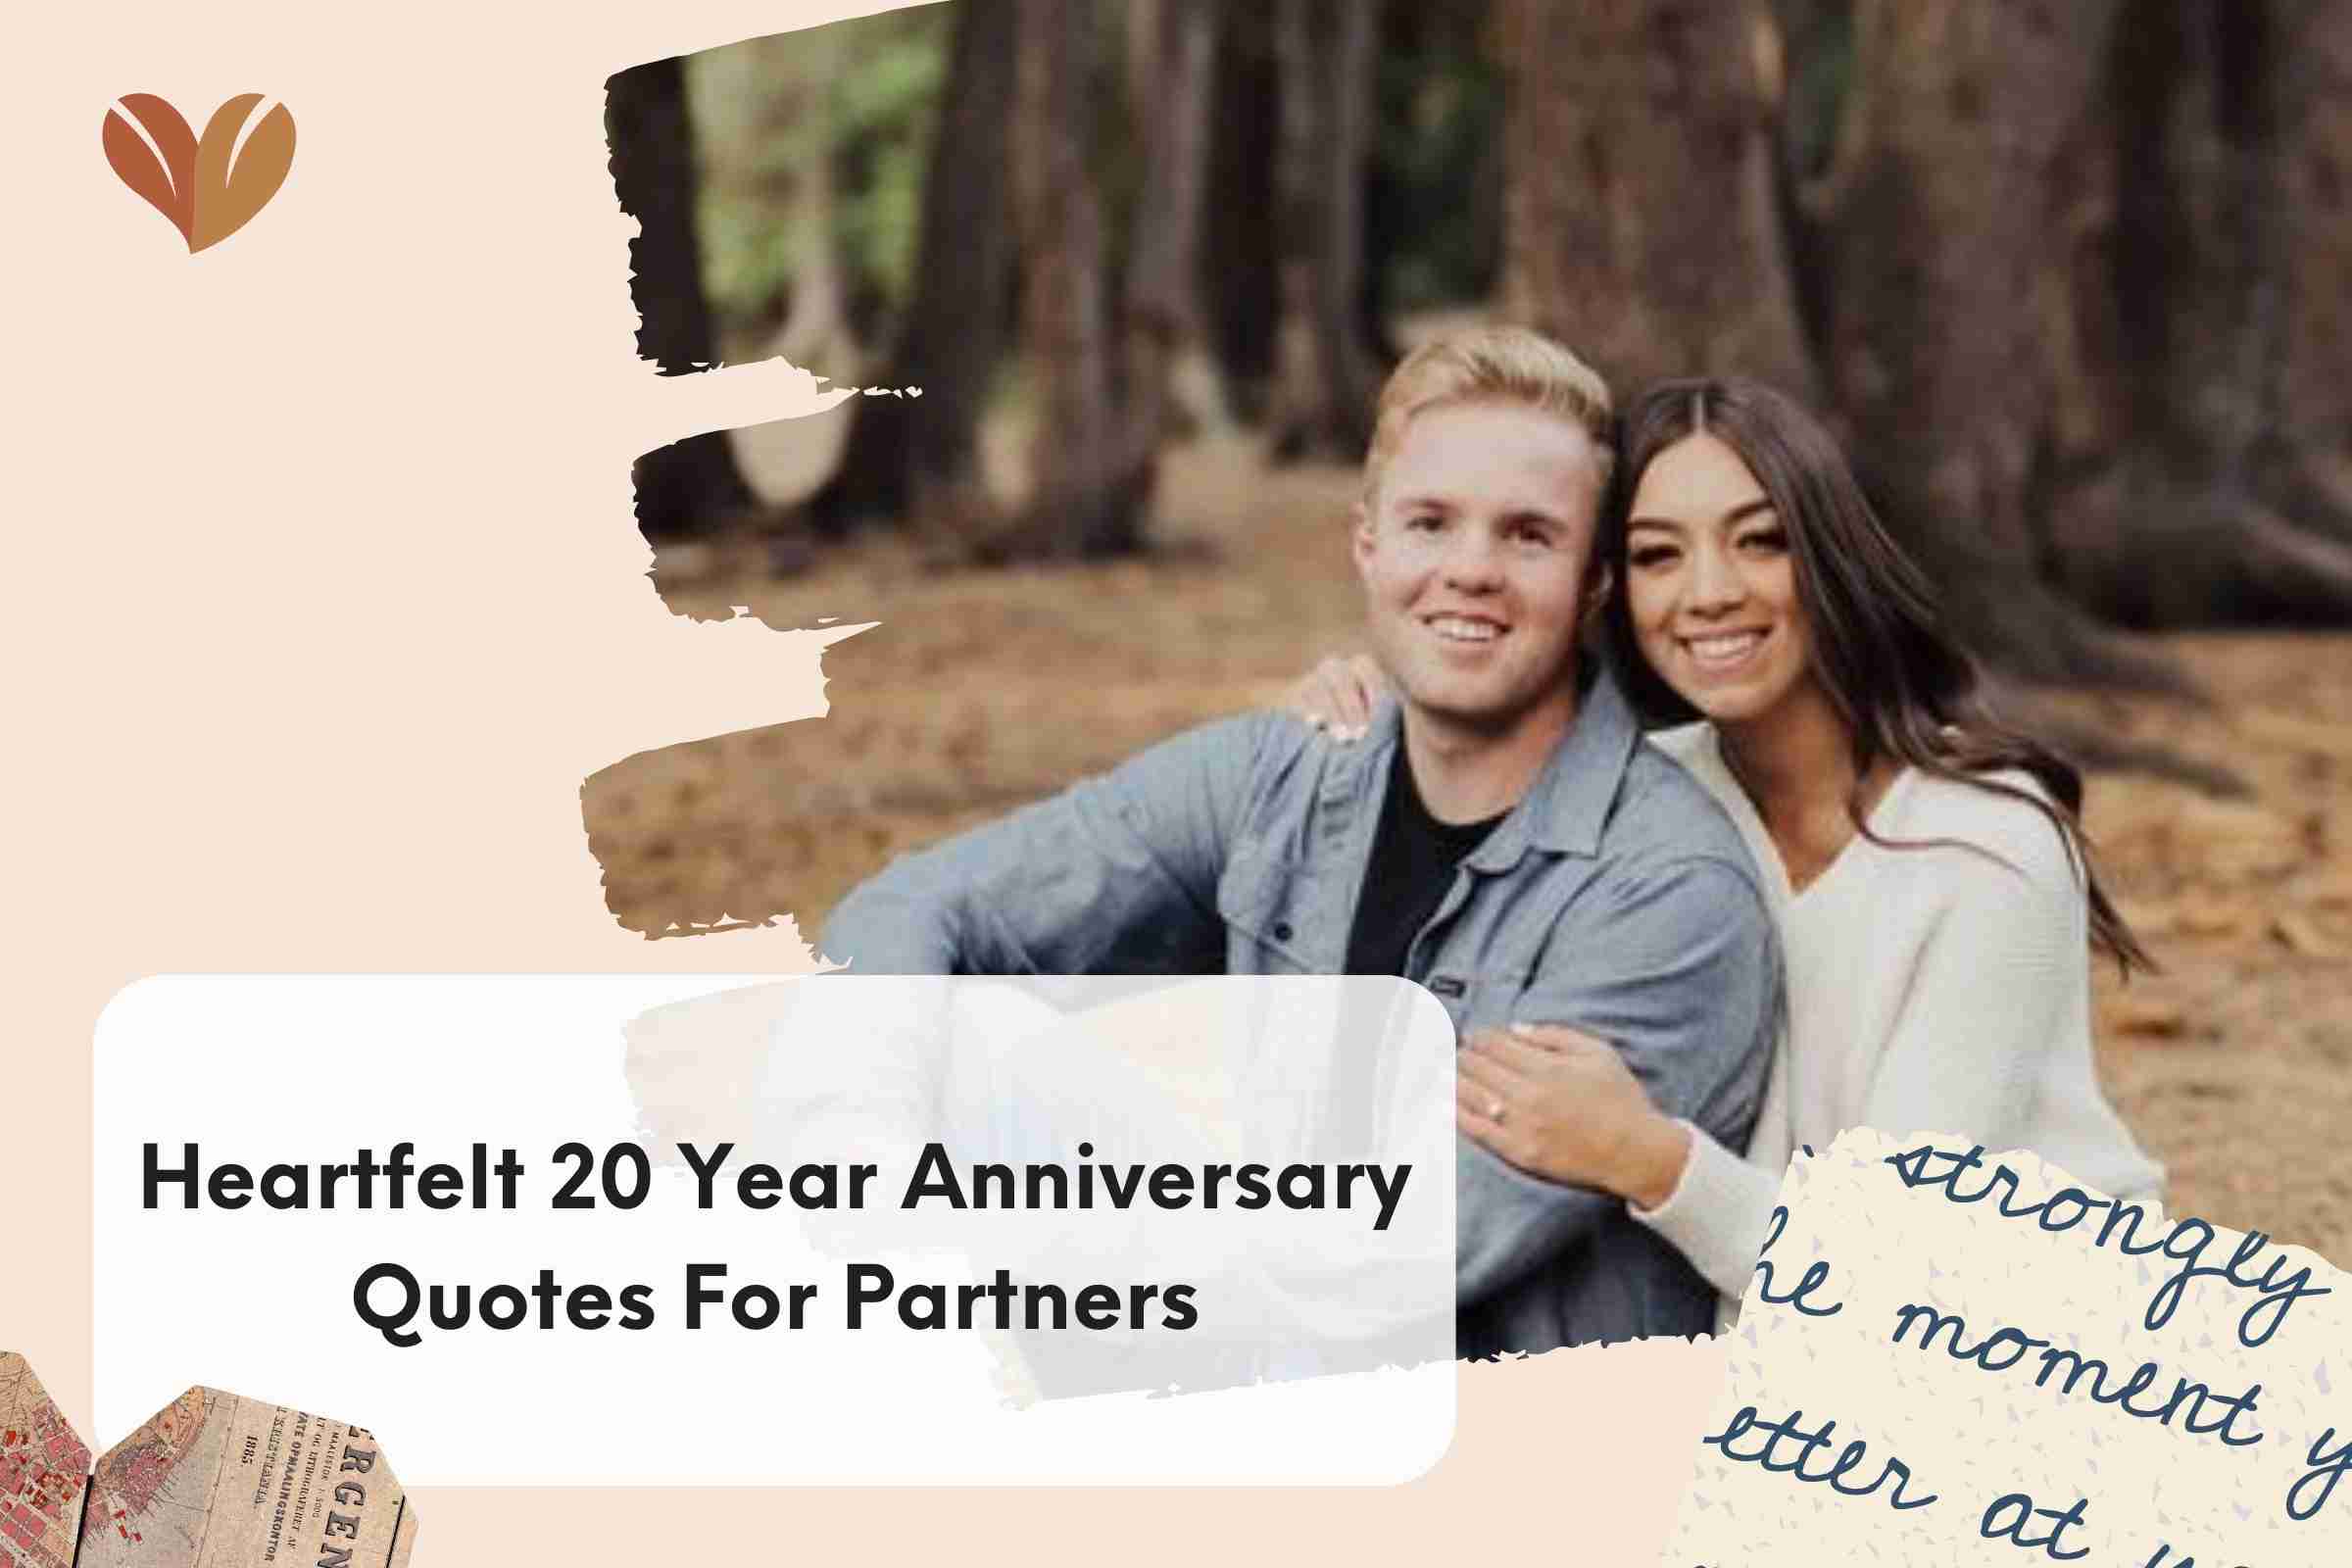 Heartfelt 20 Year Anniversary Quotes For Partners